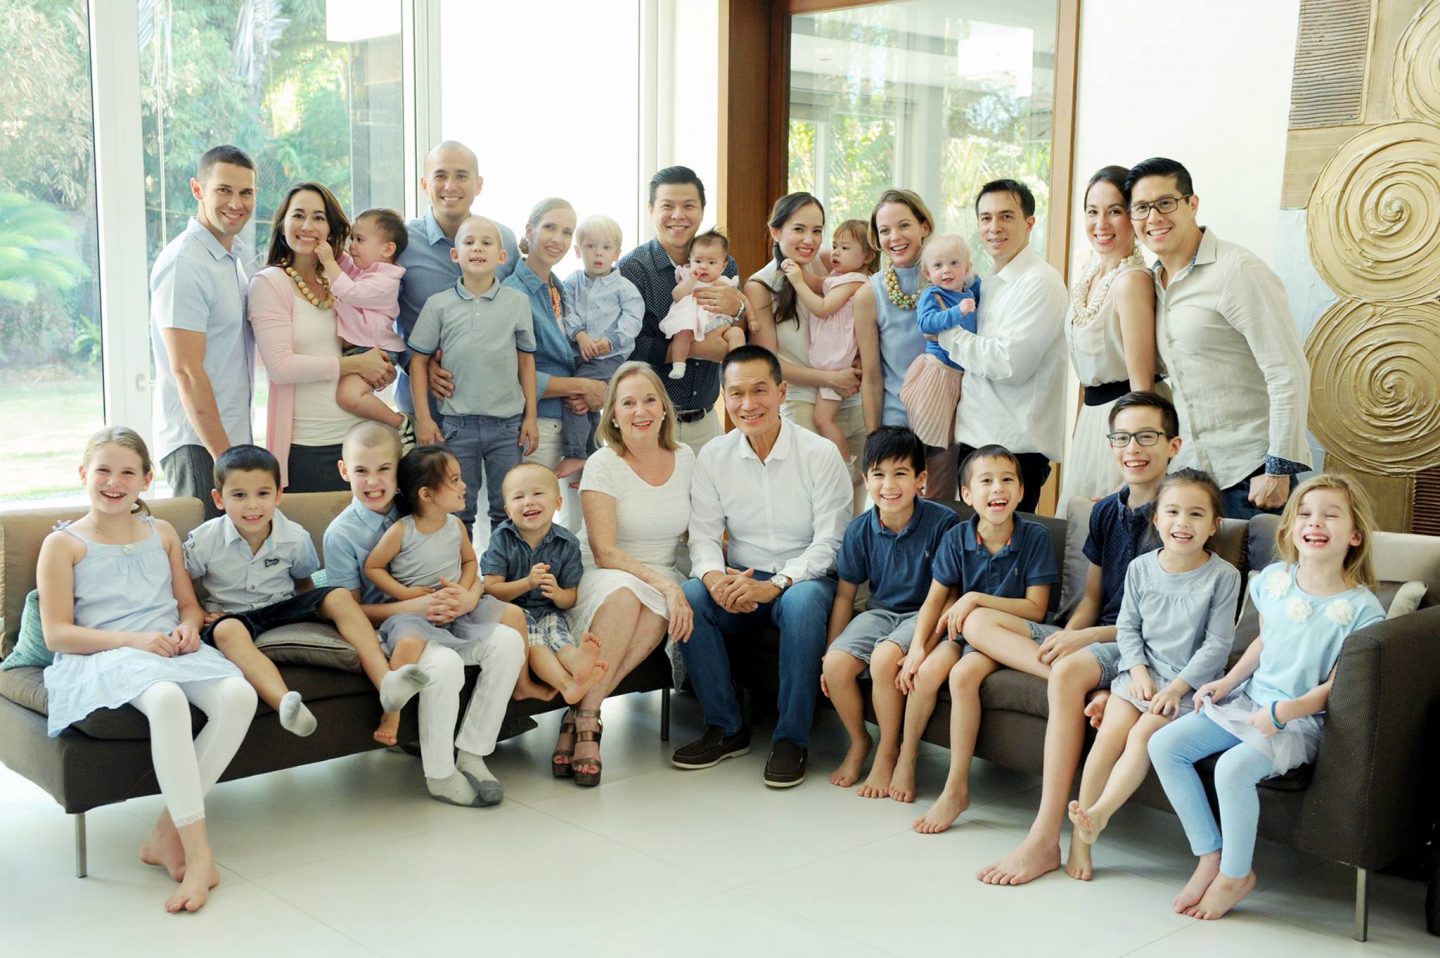 Family was so much fun that Peter Tan-Chi Jr (standing, third from right) never found the need to bow to peer pressure. Here, Peter Jr is seen with his siblings, their spouses and children and his parents (seated, centre). Photo from Rev Dr Peter Tan-Chi's Facebook.